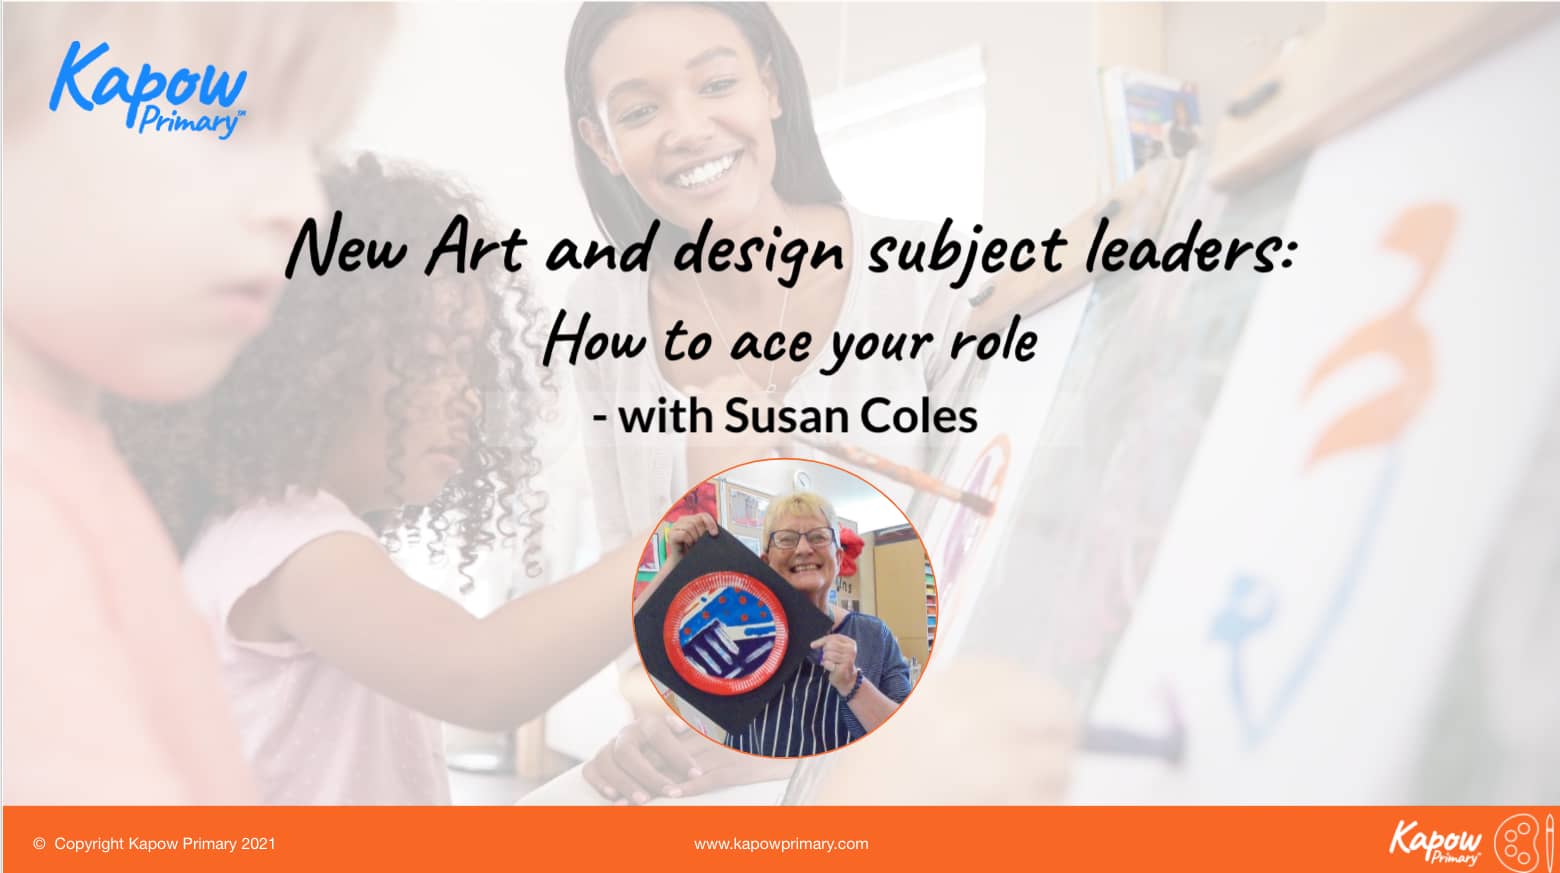 Webinar: Art and design subject leaders with Susan Coles